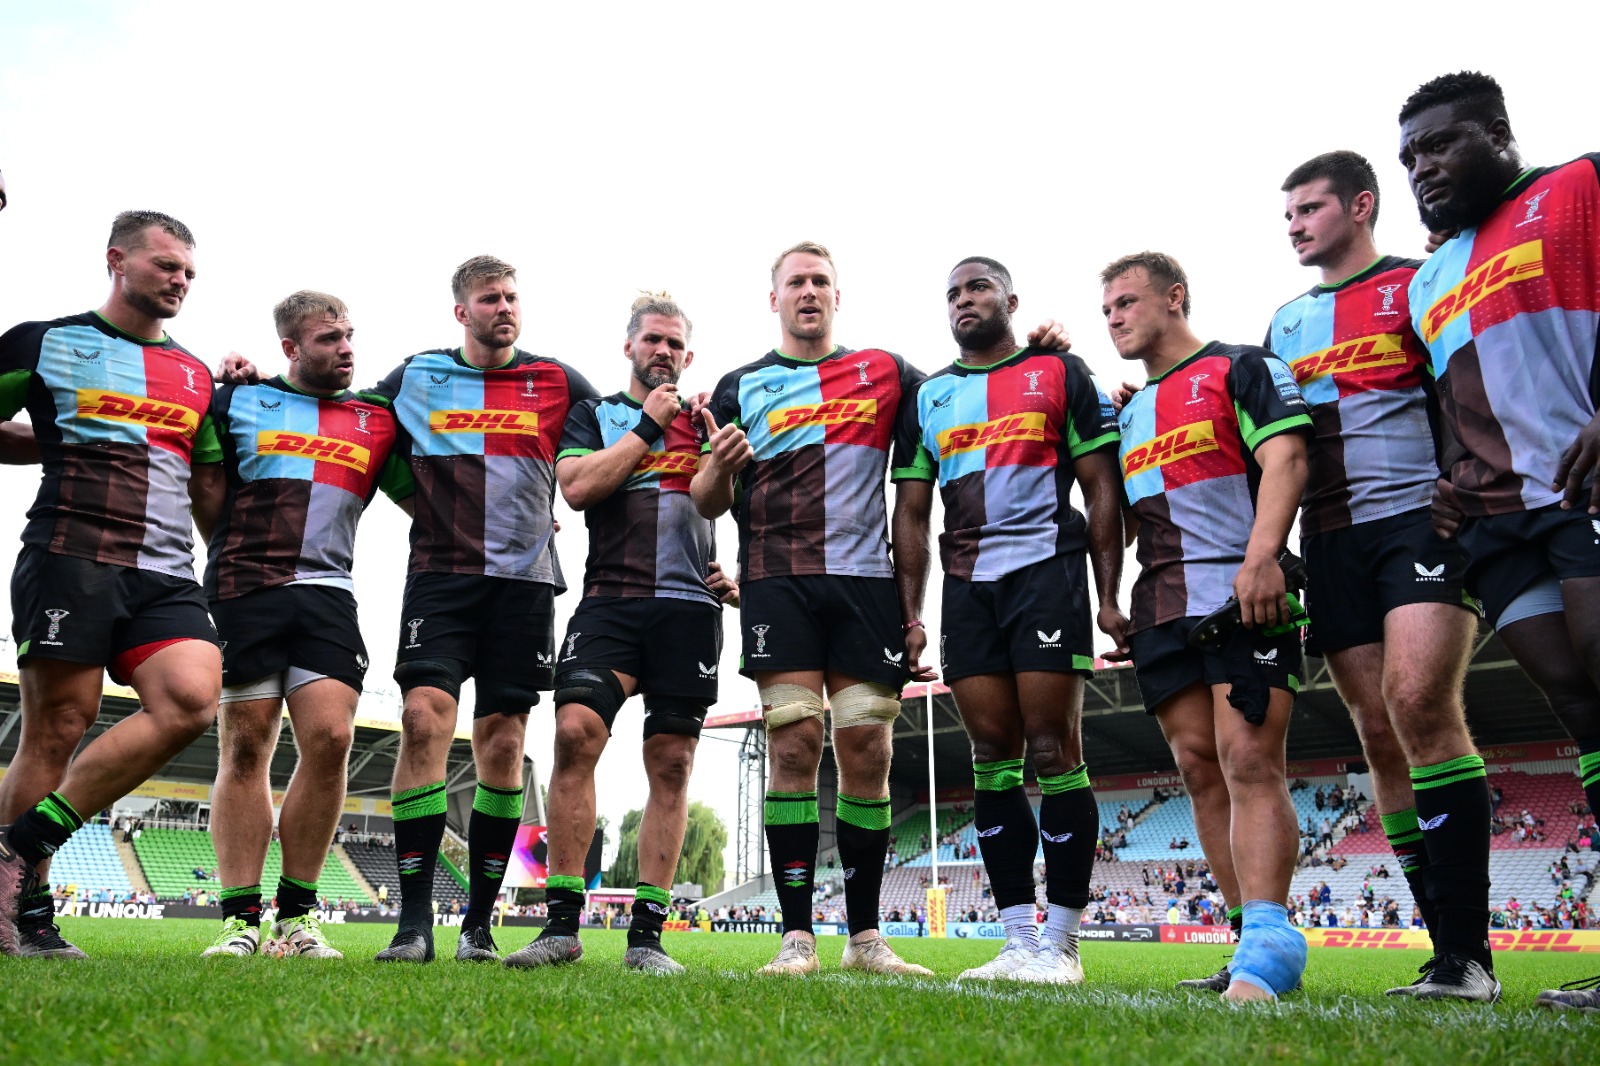 Harlequins Premiership Rugby Club come to Marbella